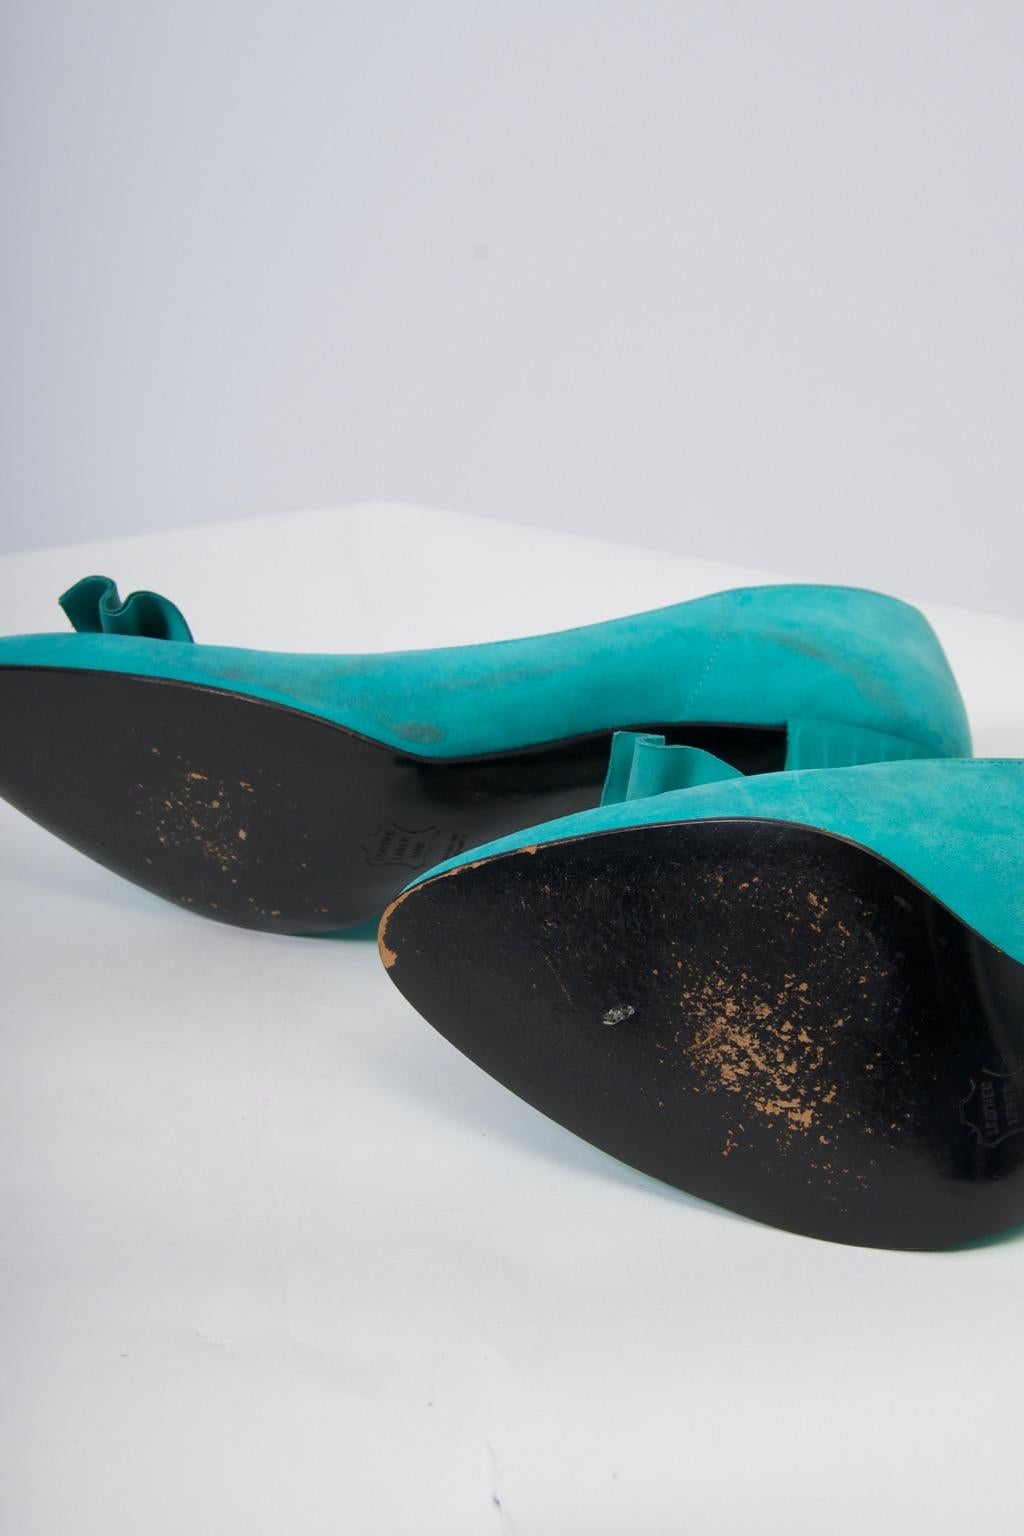 Turquoise Suede 1980s Pumps by Seducta In Good Condition For Sale In Alford, MA